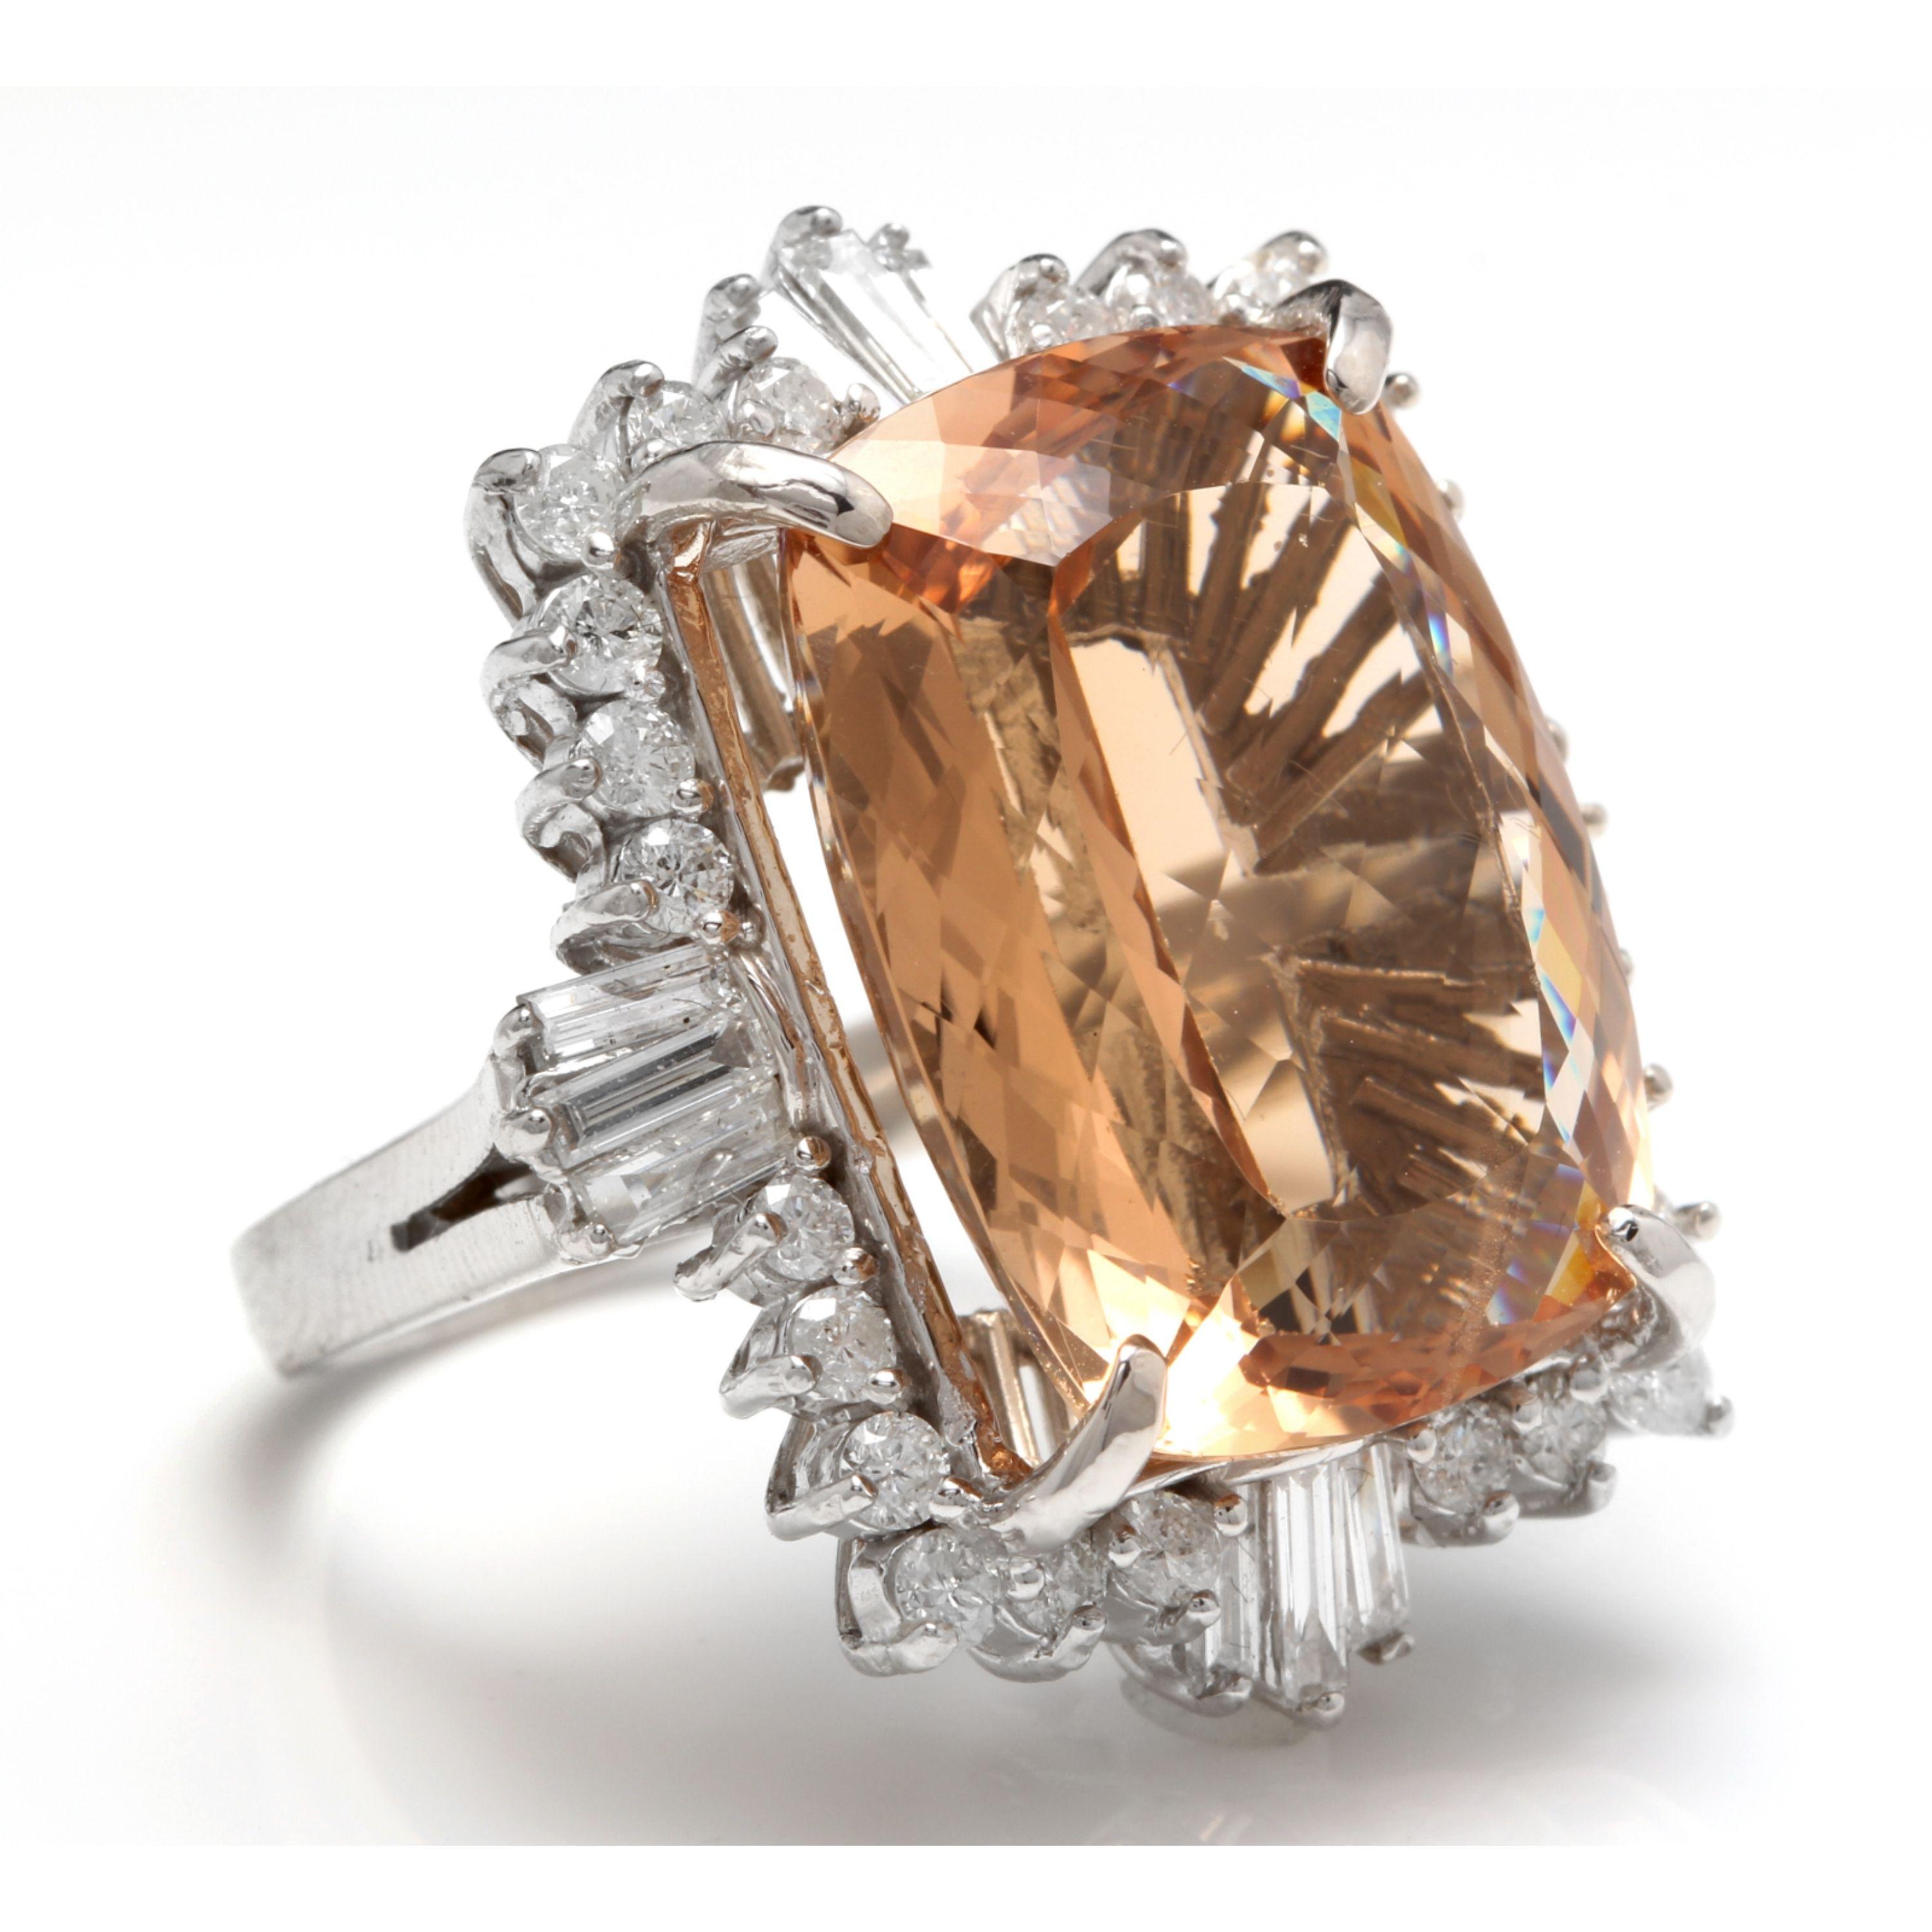 25.00 Carats Impressive Natural Morganite and Diamond 14K Solid White Gold Ring

Total Morganite Weight is: Approx. 23.00 Carats

Morganite Treatment: Heating

Morganite Measures: Approx. 20.00 x 16.00mm

Natural Round & Baguette Diamonds Weight: